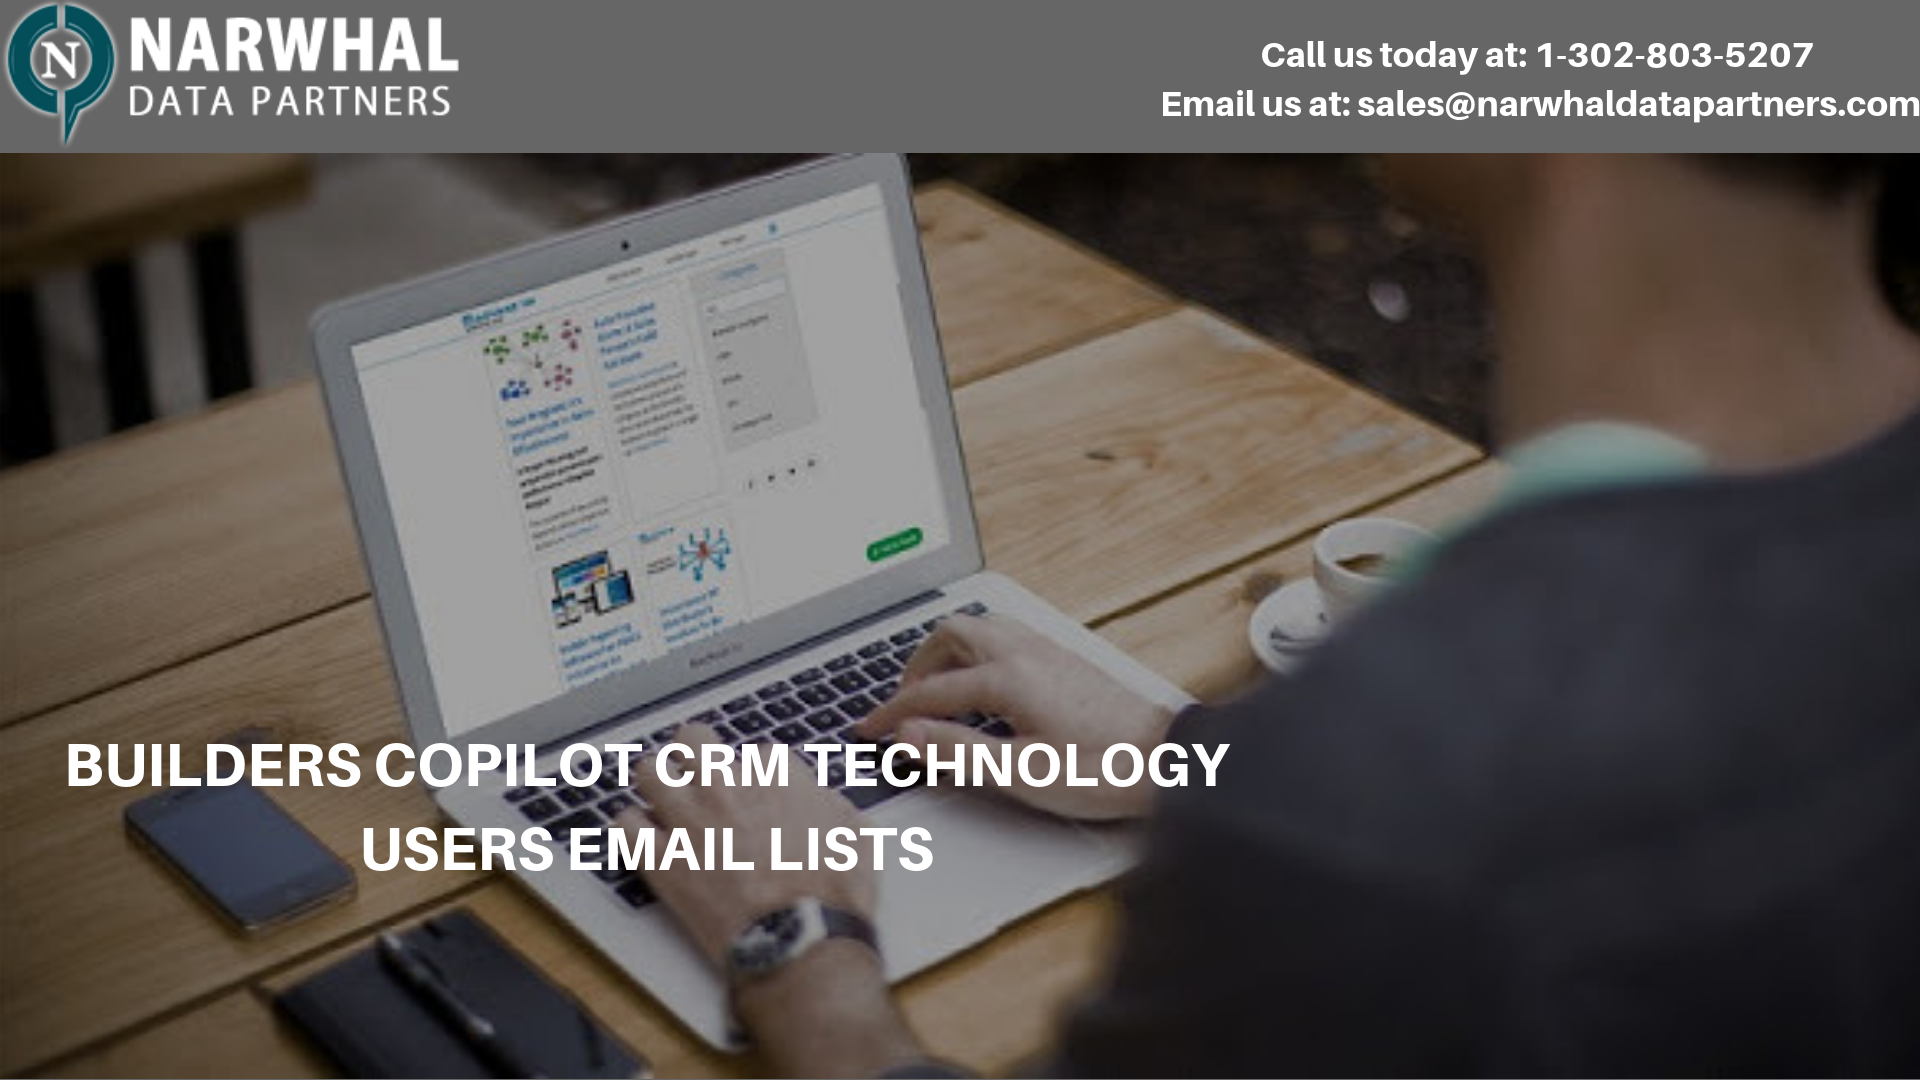 http://narwhaldatapartners.com/builders-copilot-crm-technology-users-email-list.html